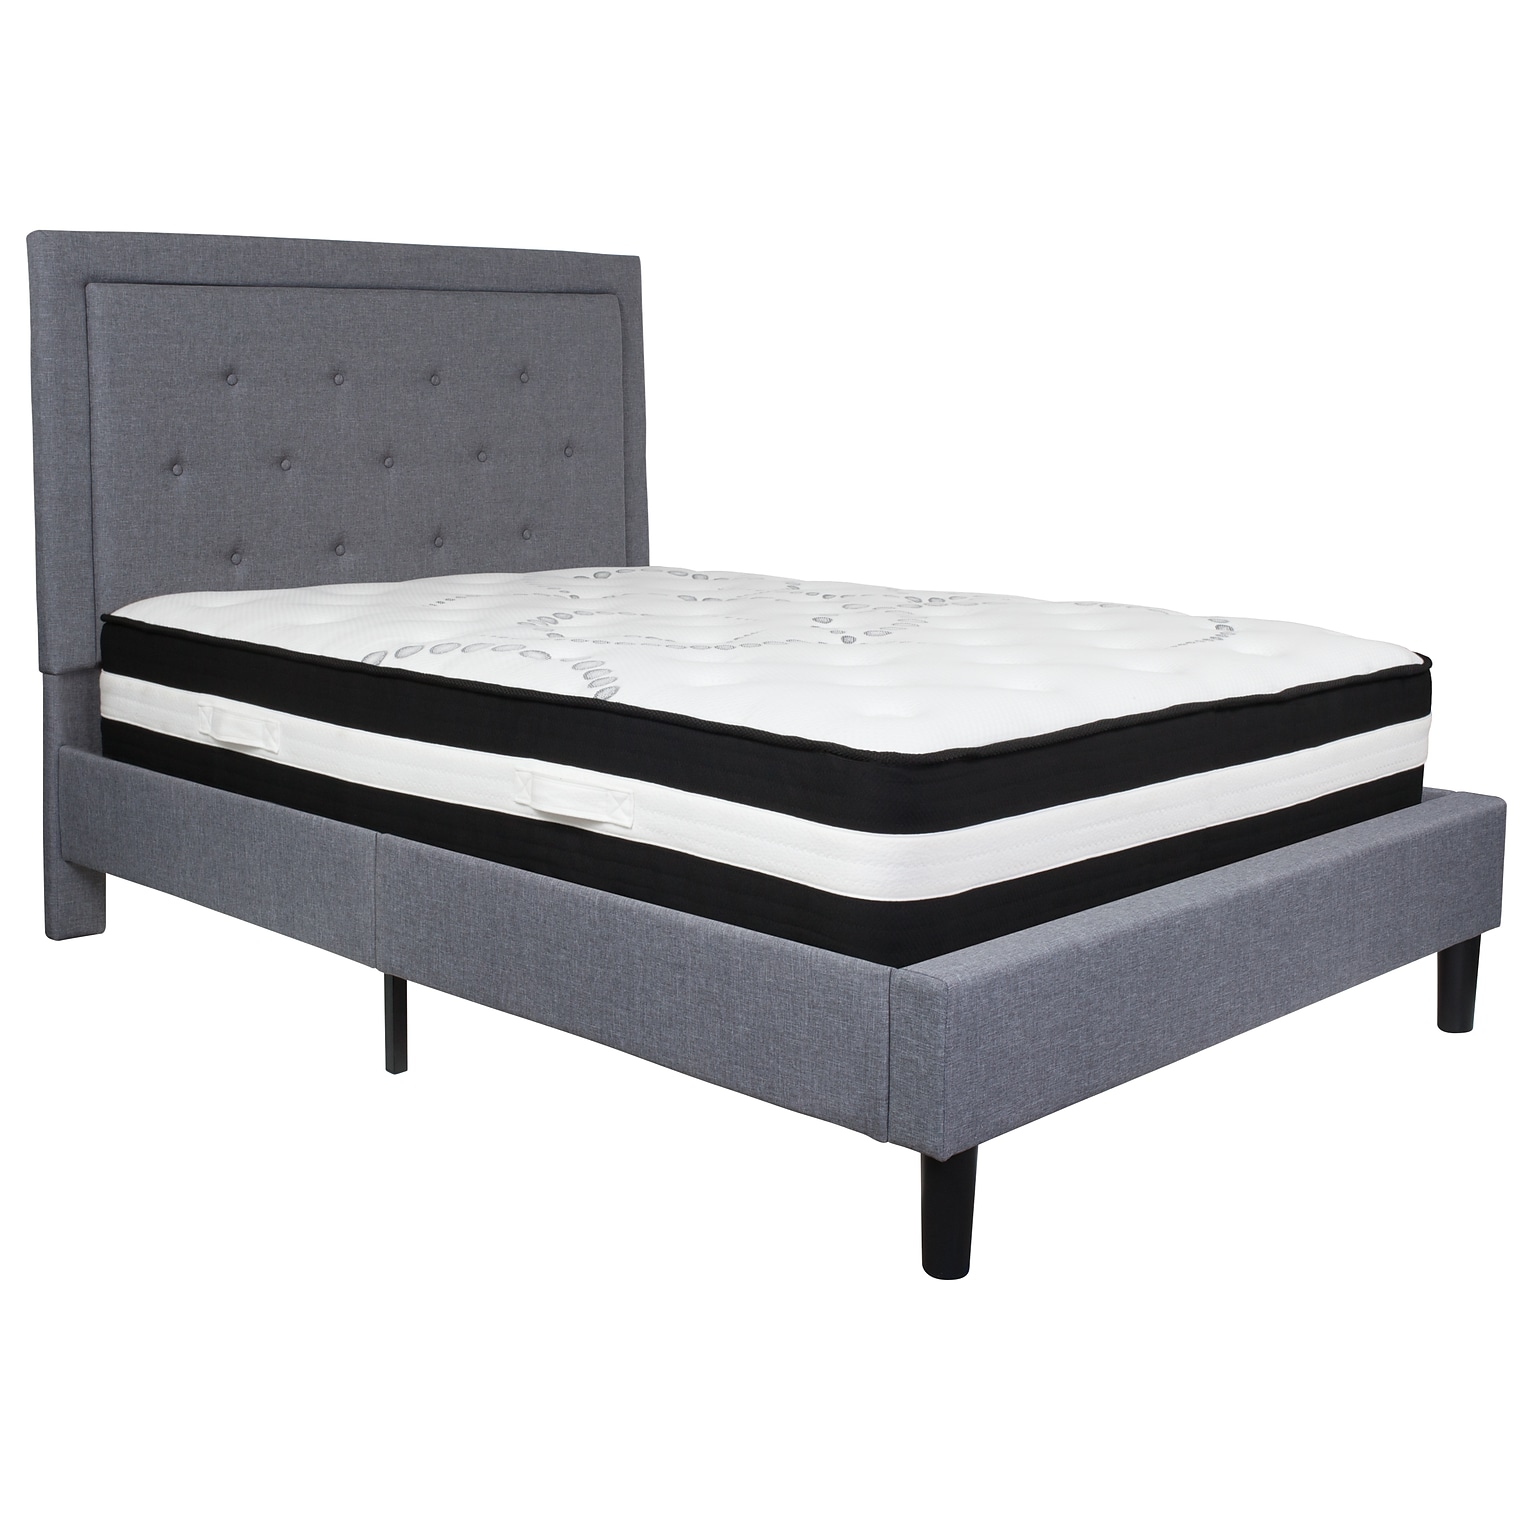 Flash Furniture Roxbury Tufted Upholstered Platform Bed in Light Gray Fabric with Pocket Spring Mattress, Full (SLBM26)